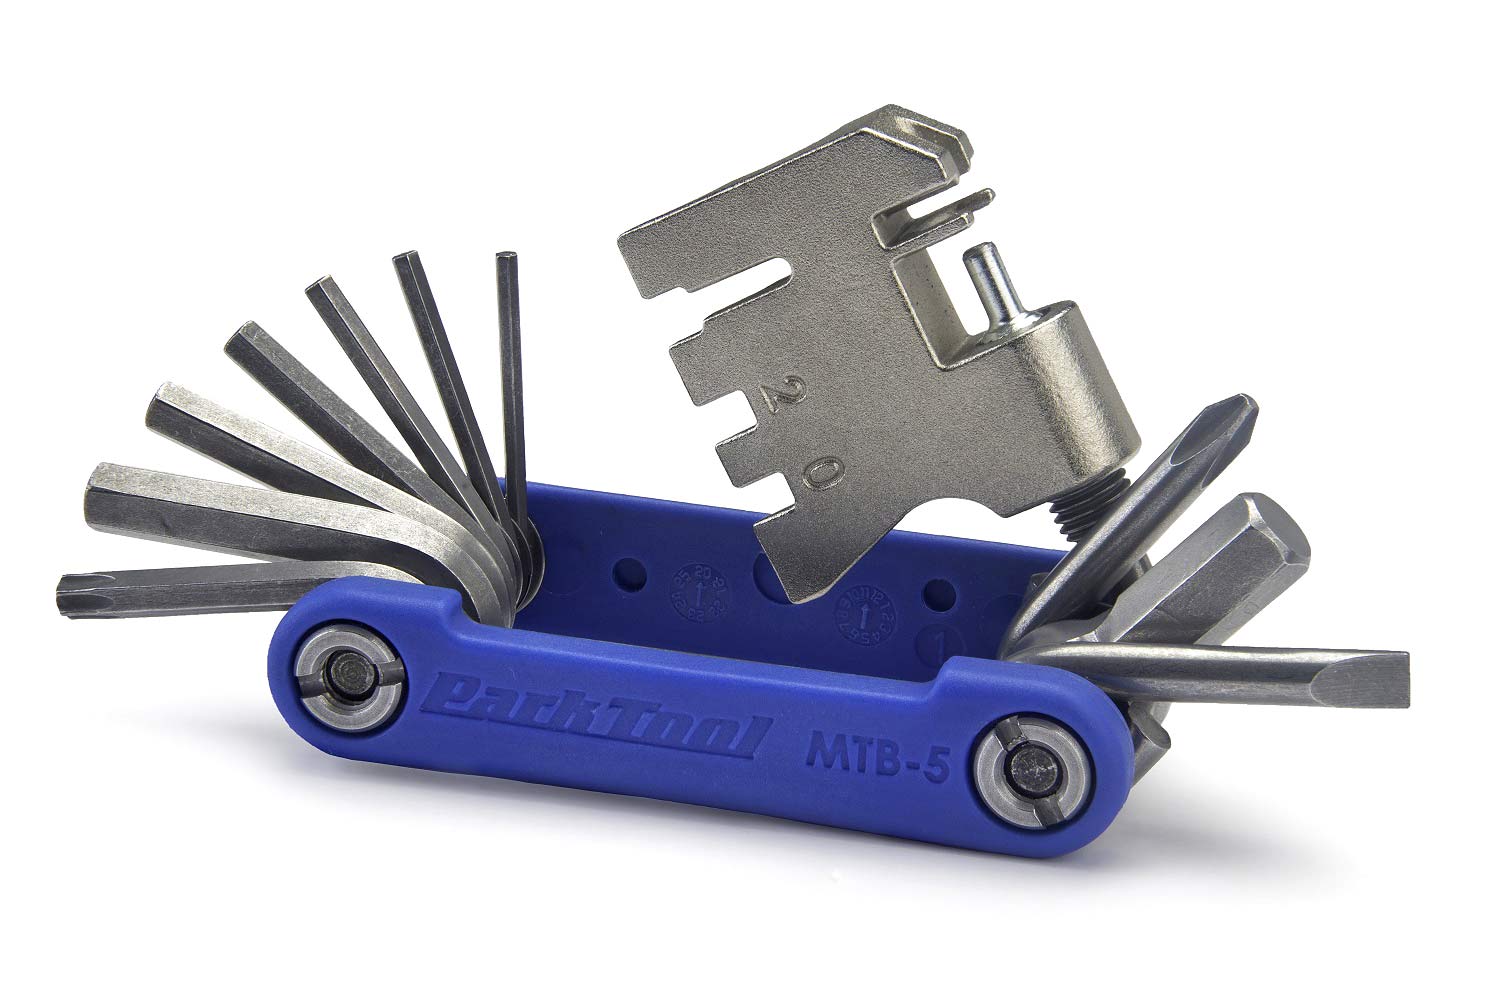 Park Tool to the MTB-5 Rescue Multi-Tool